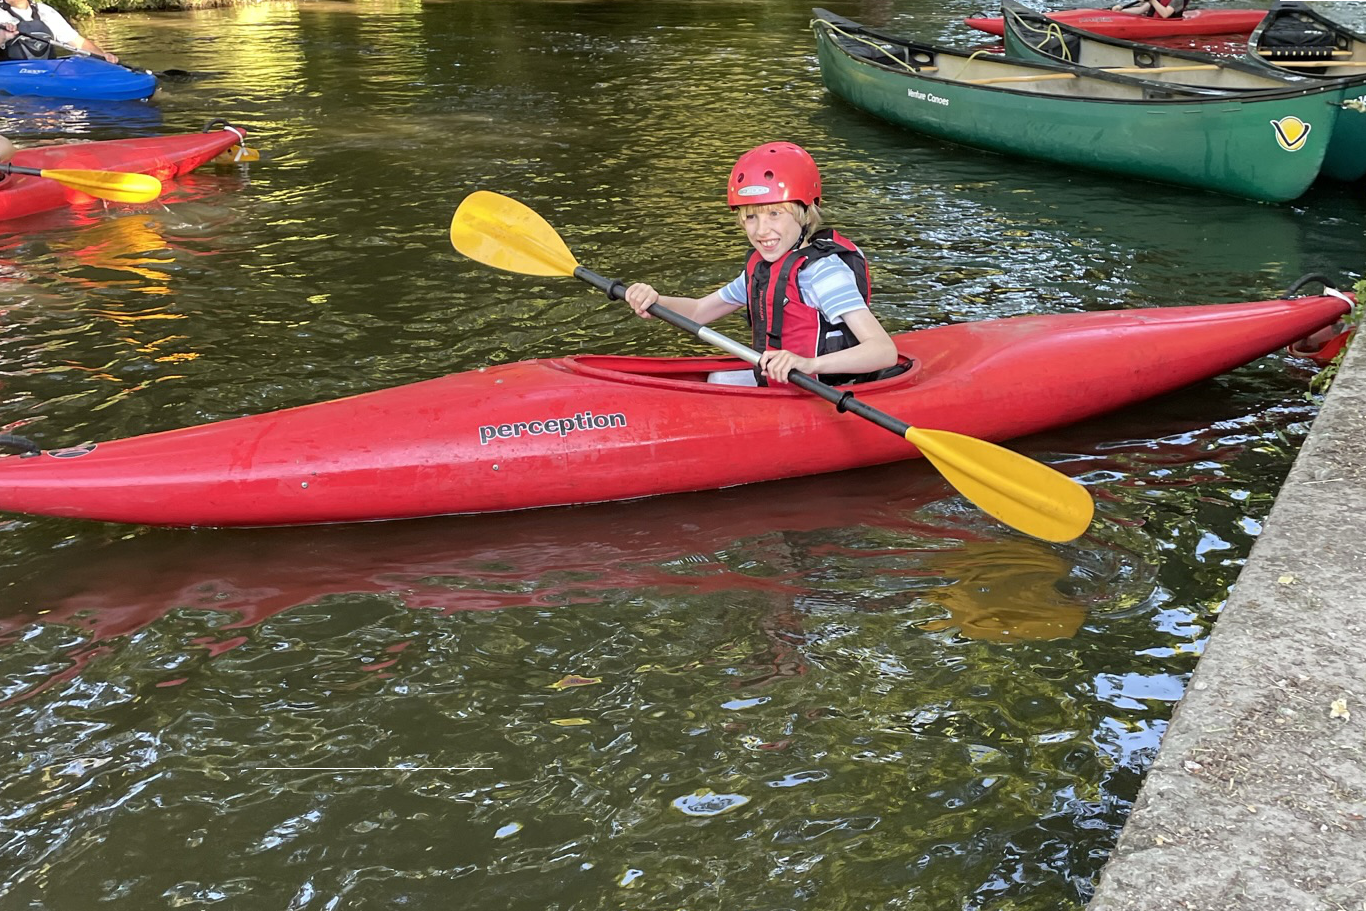 Toby in a kayak on the canal